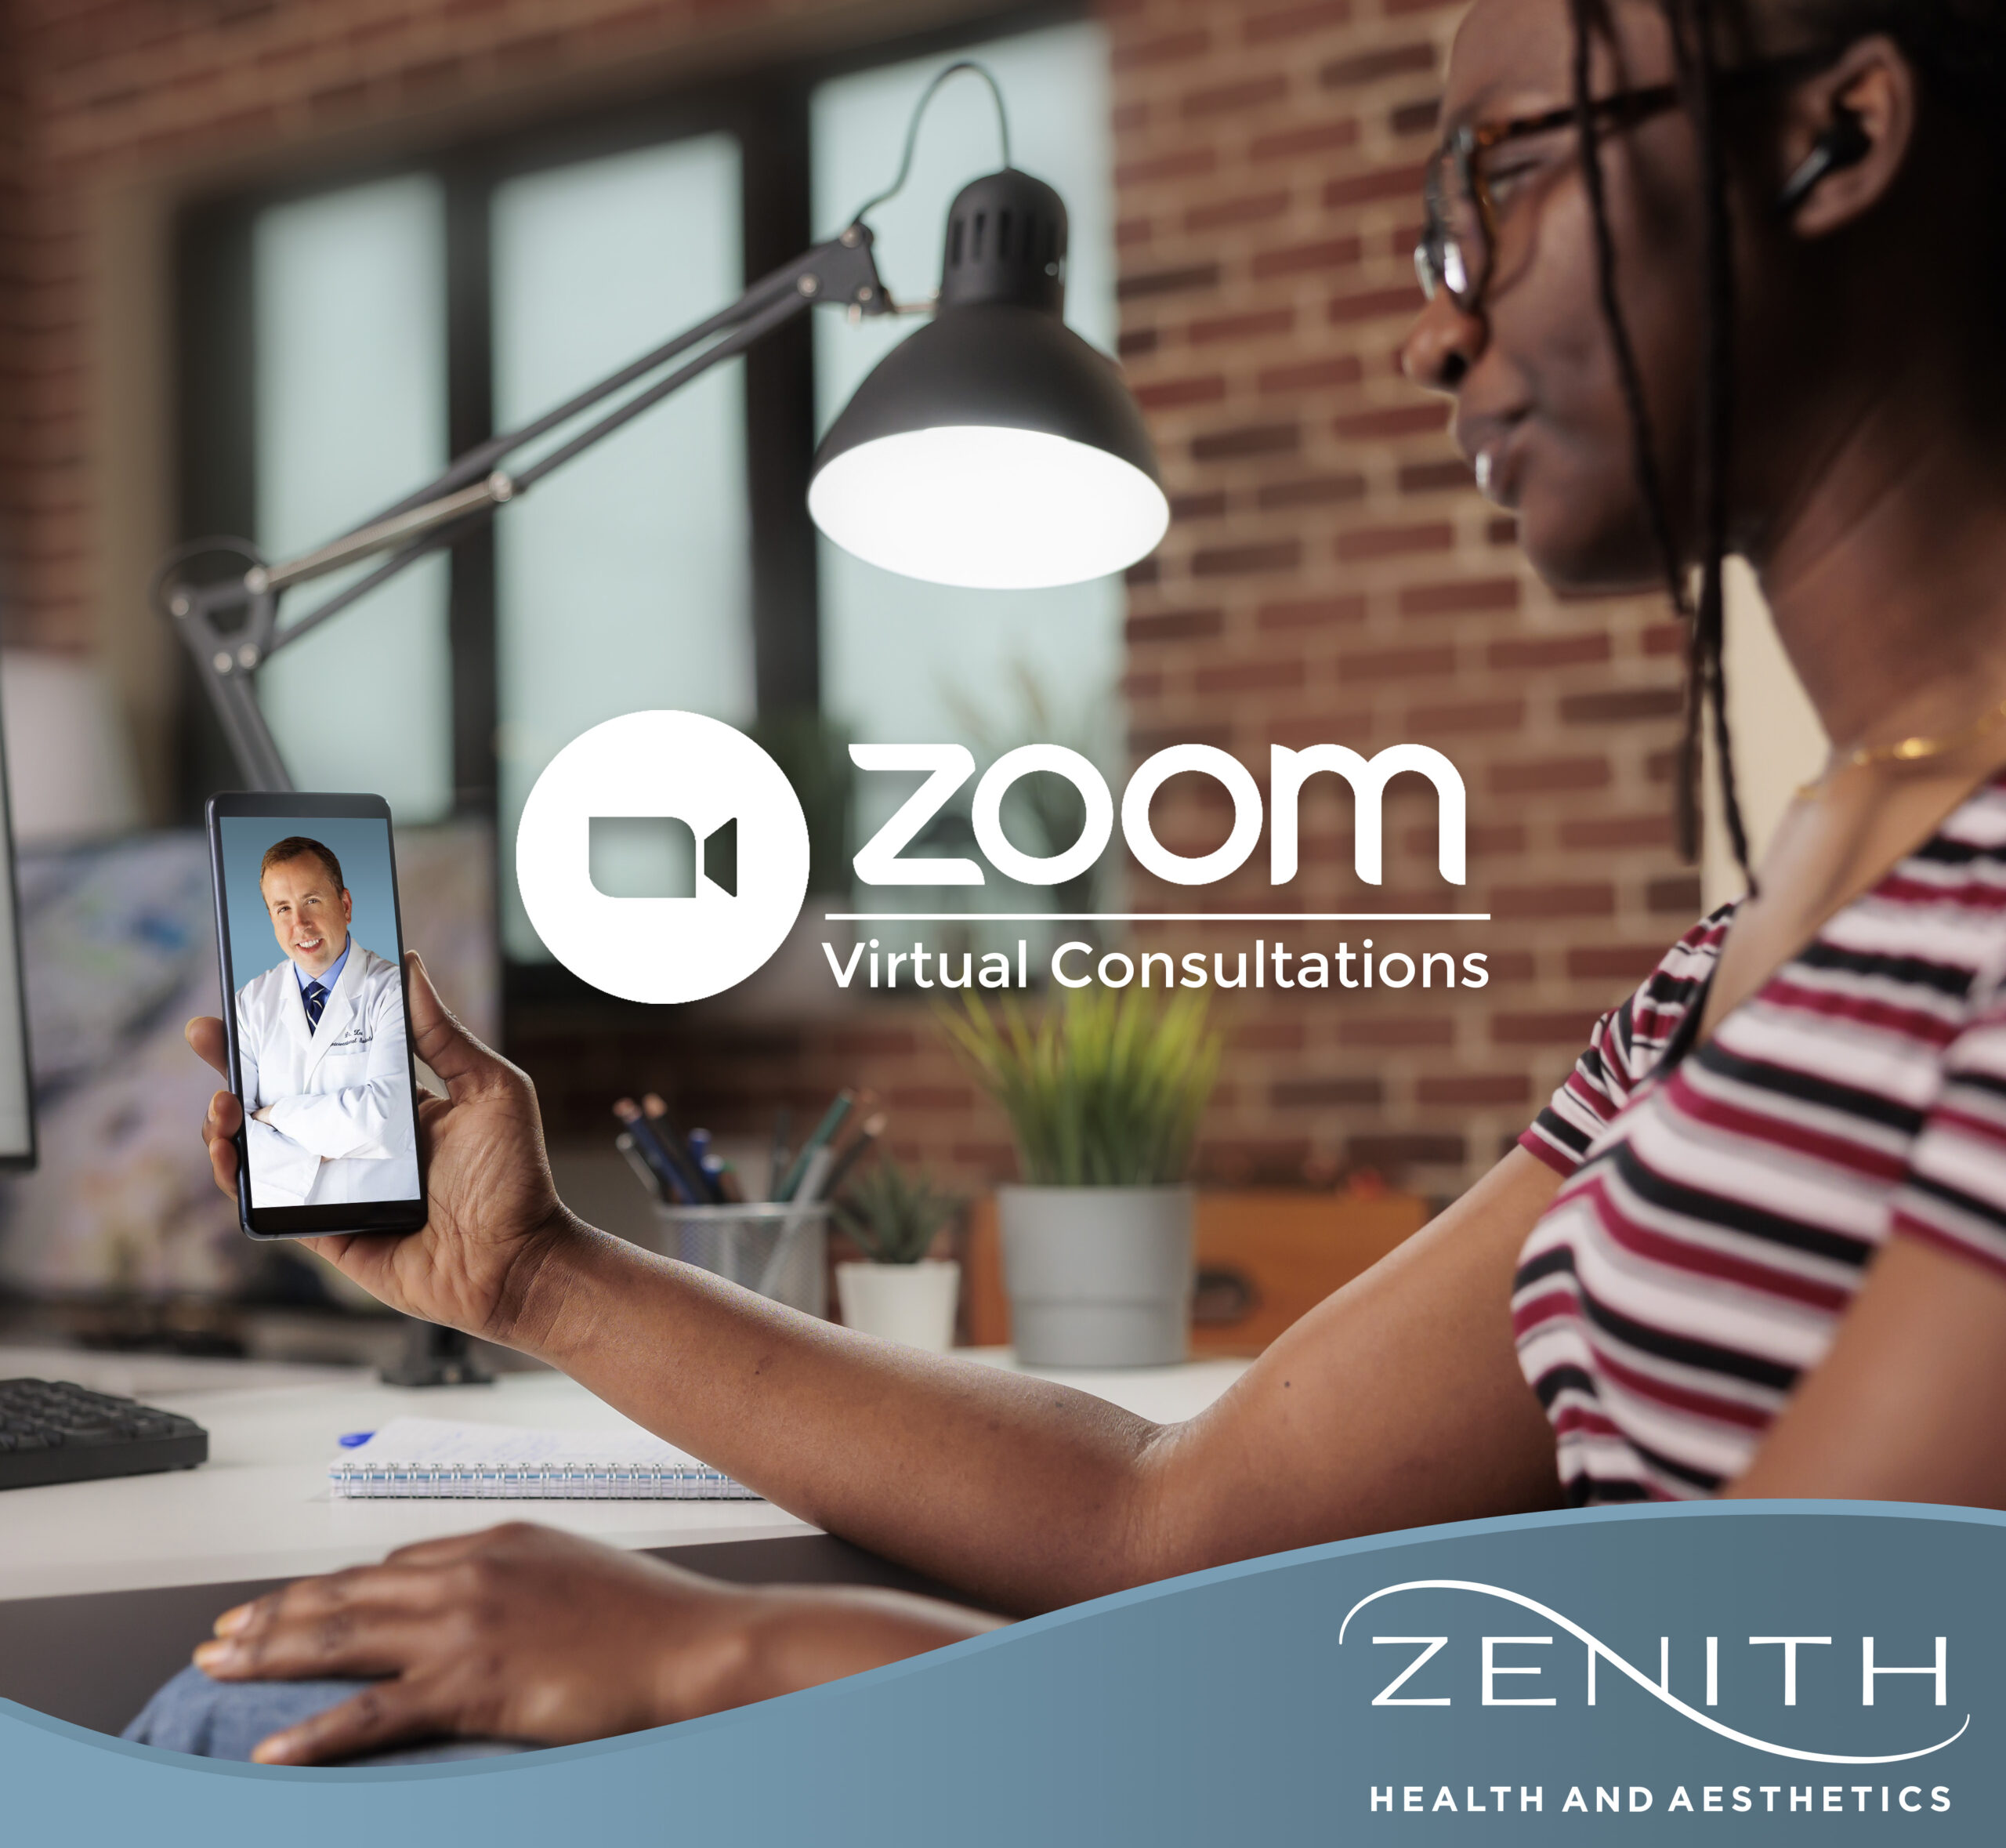 Zoom Virtual Consultation with Zenith Health and aesthetics